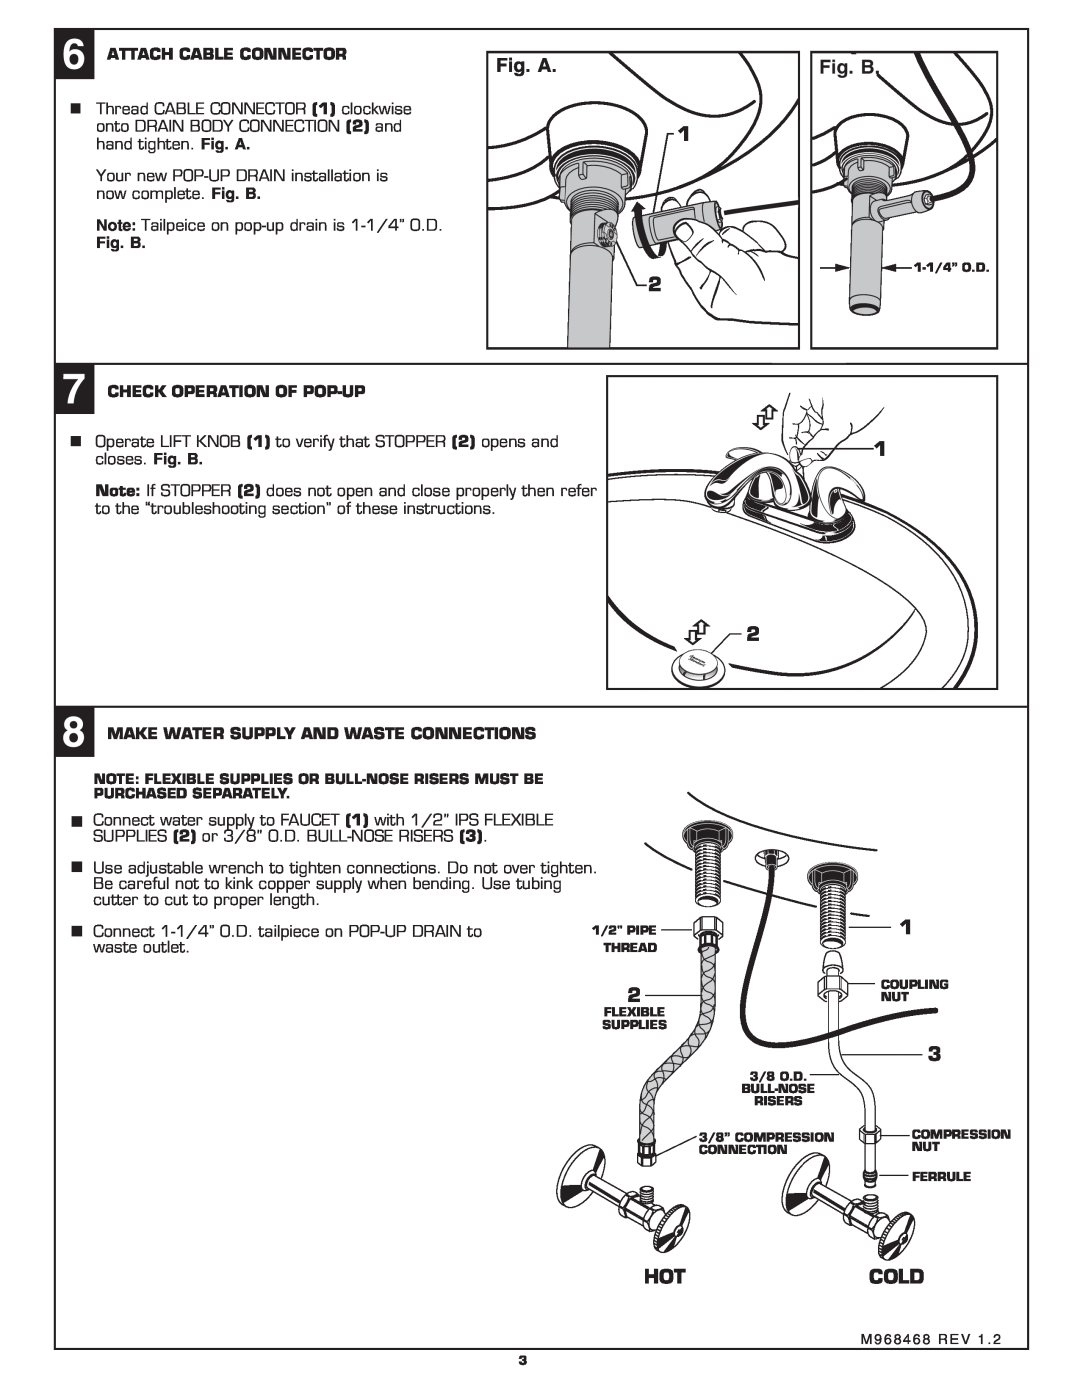 American Standard 6013S Fig. A, Fig. B, Hotcold, Attach Cable Connector, Check Operation Of Pop-Up 